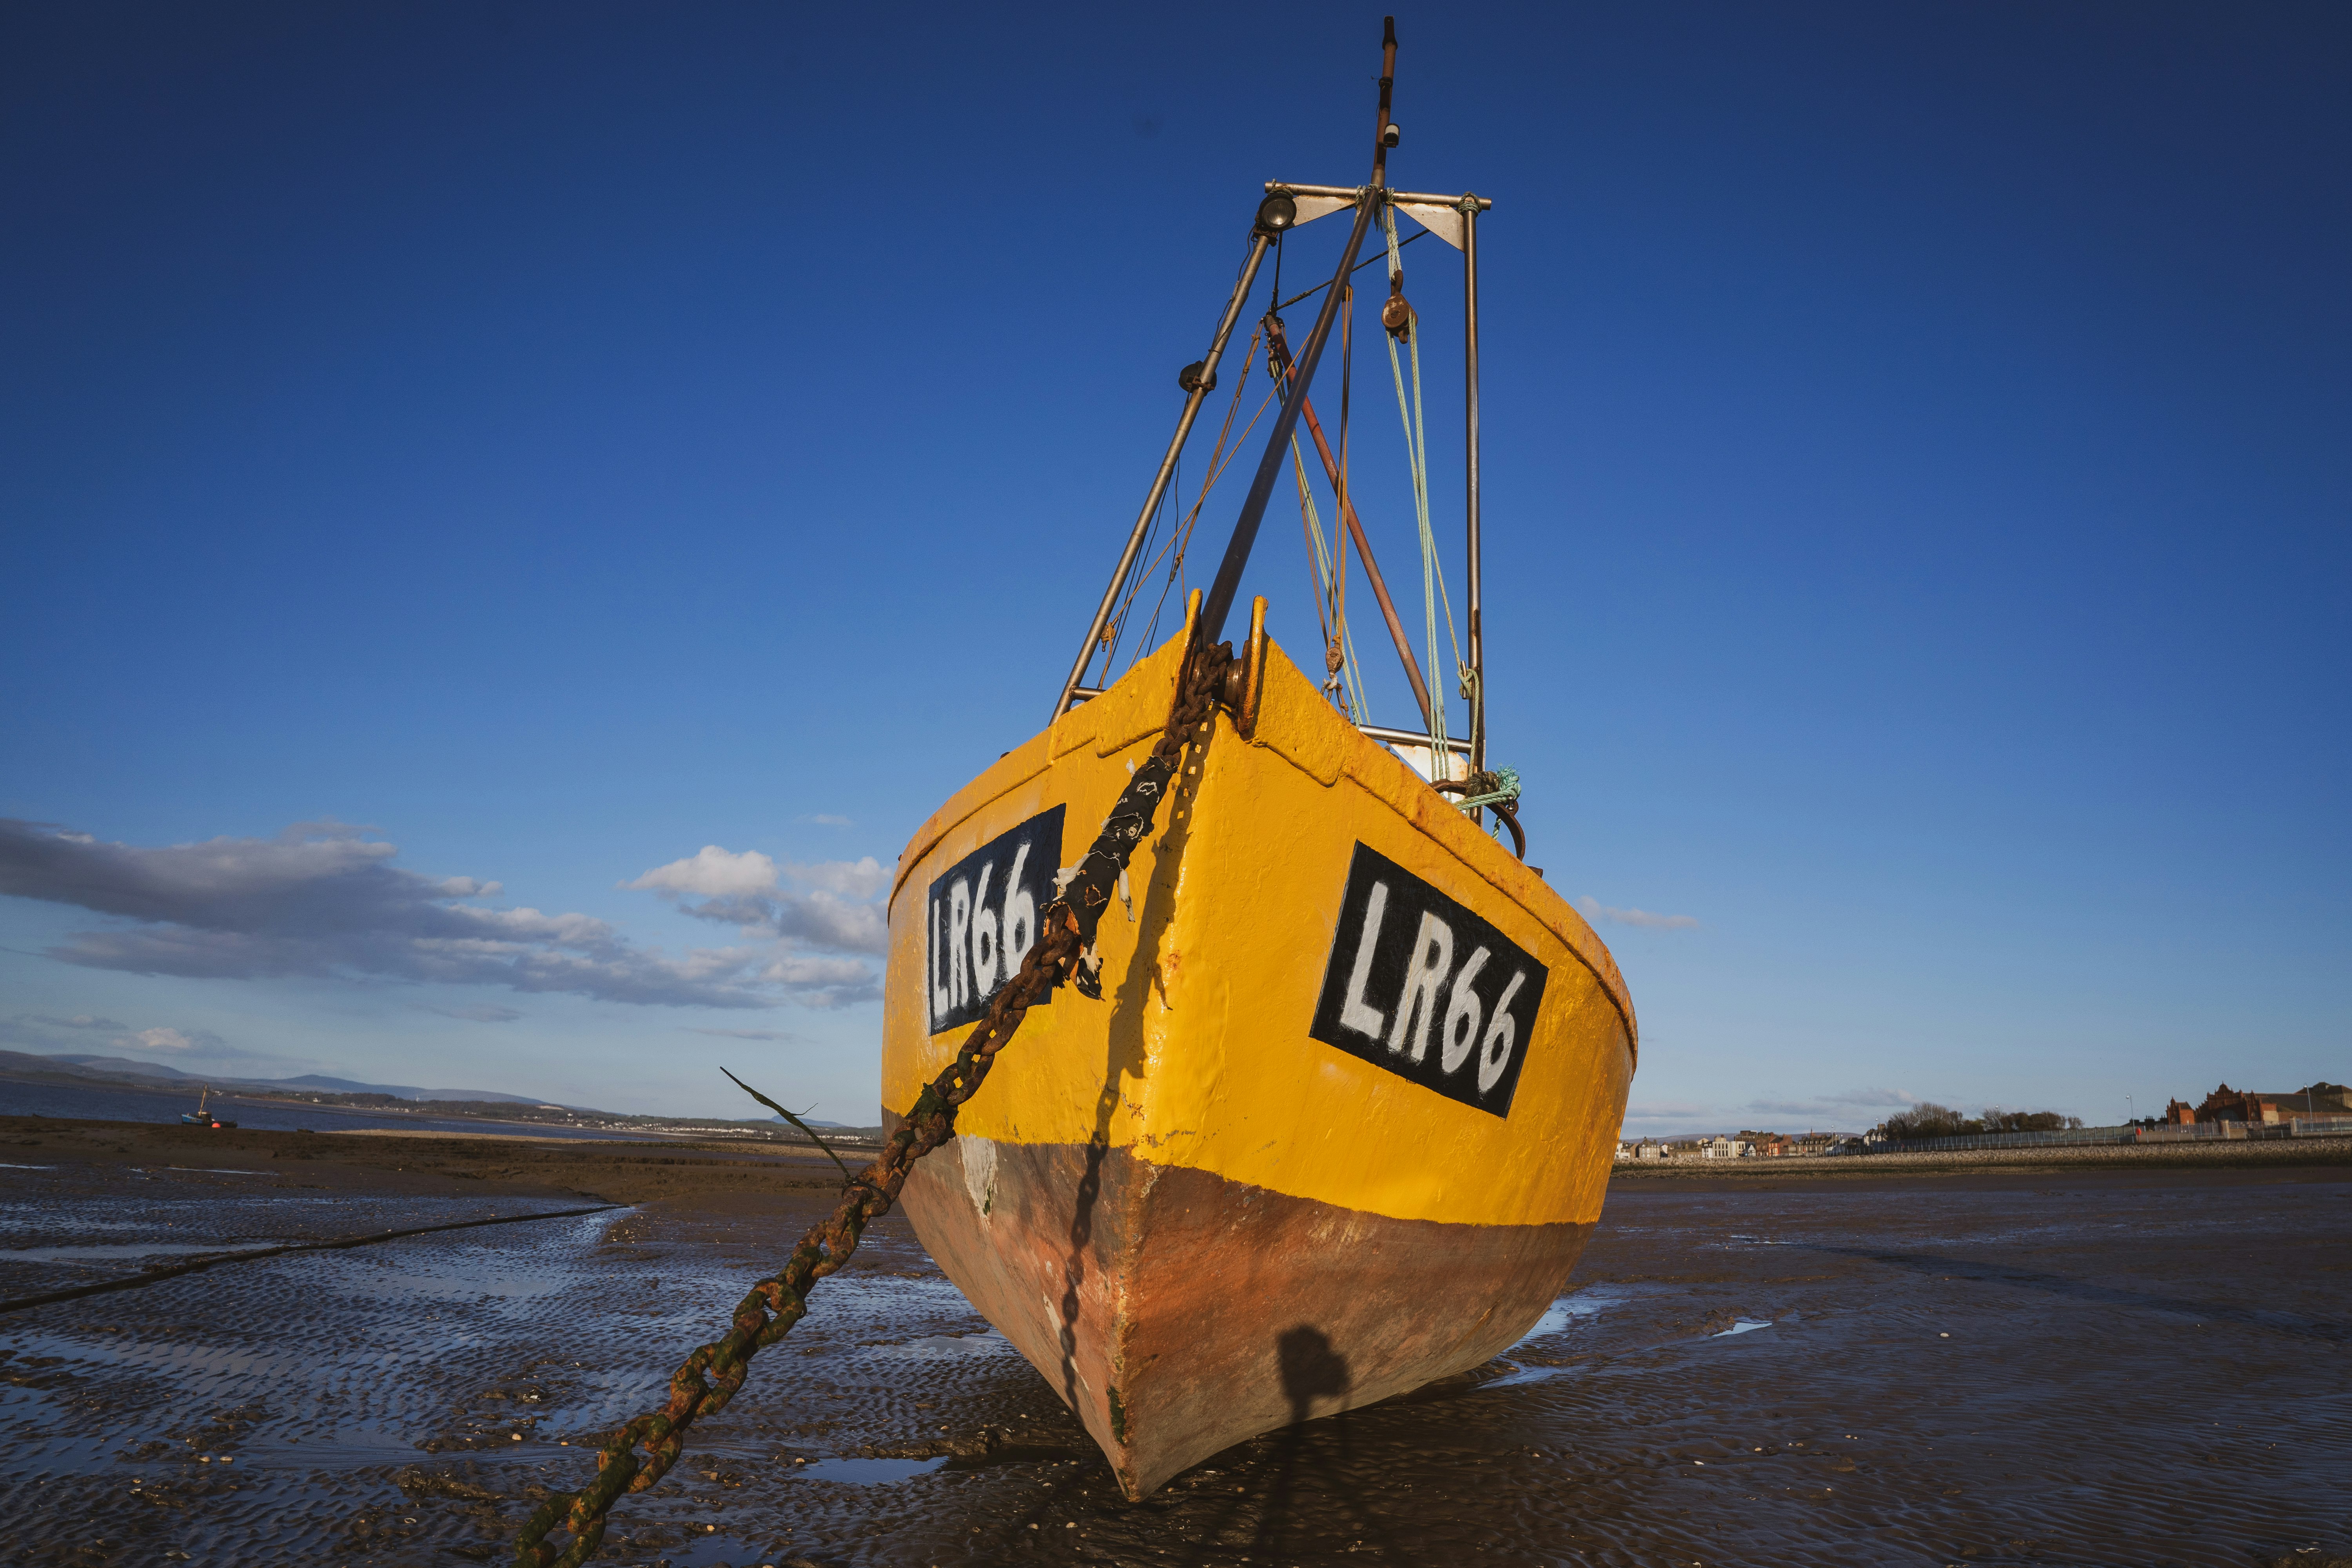 yellow and black boat on brown sand during daytime